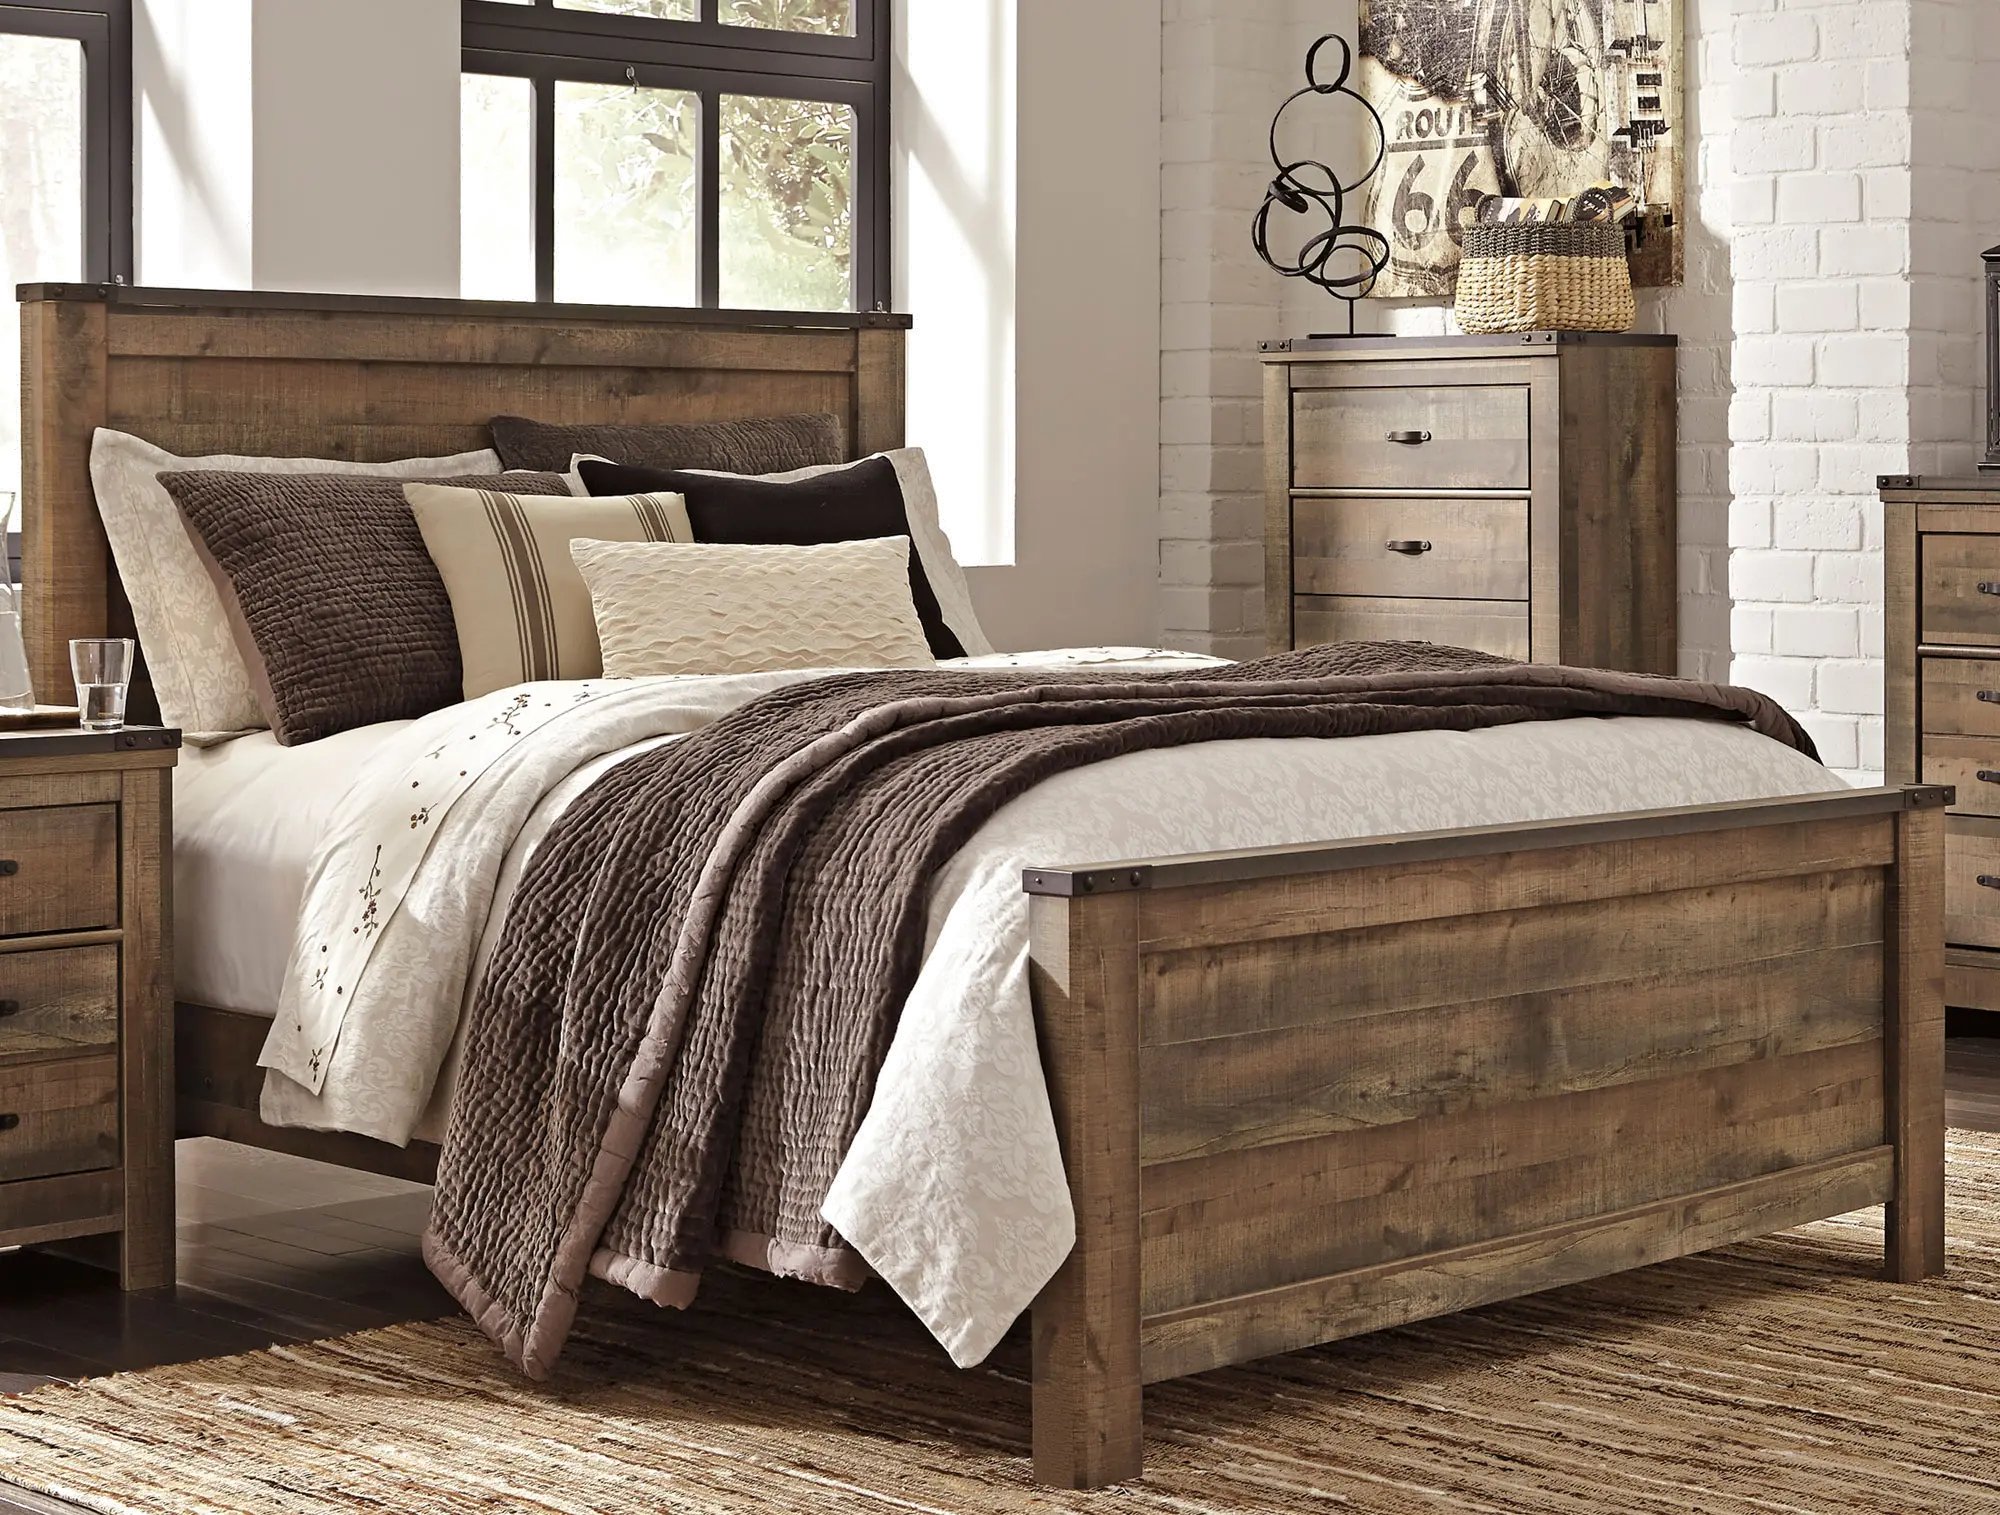 pictures of rustic bedroom furniture